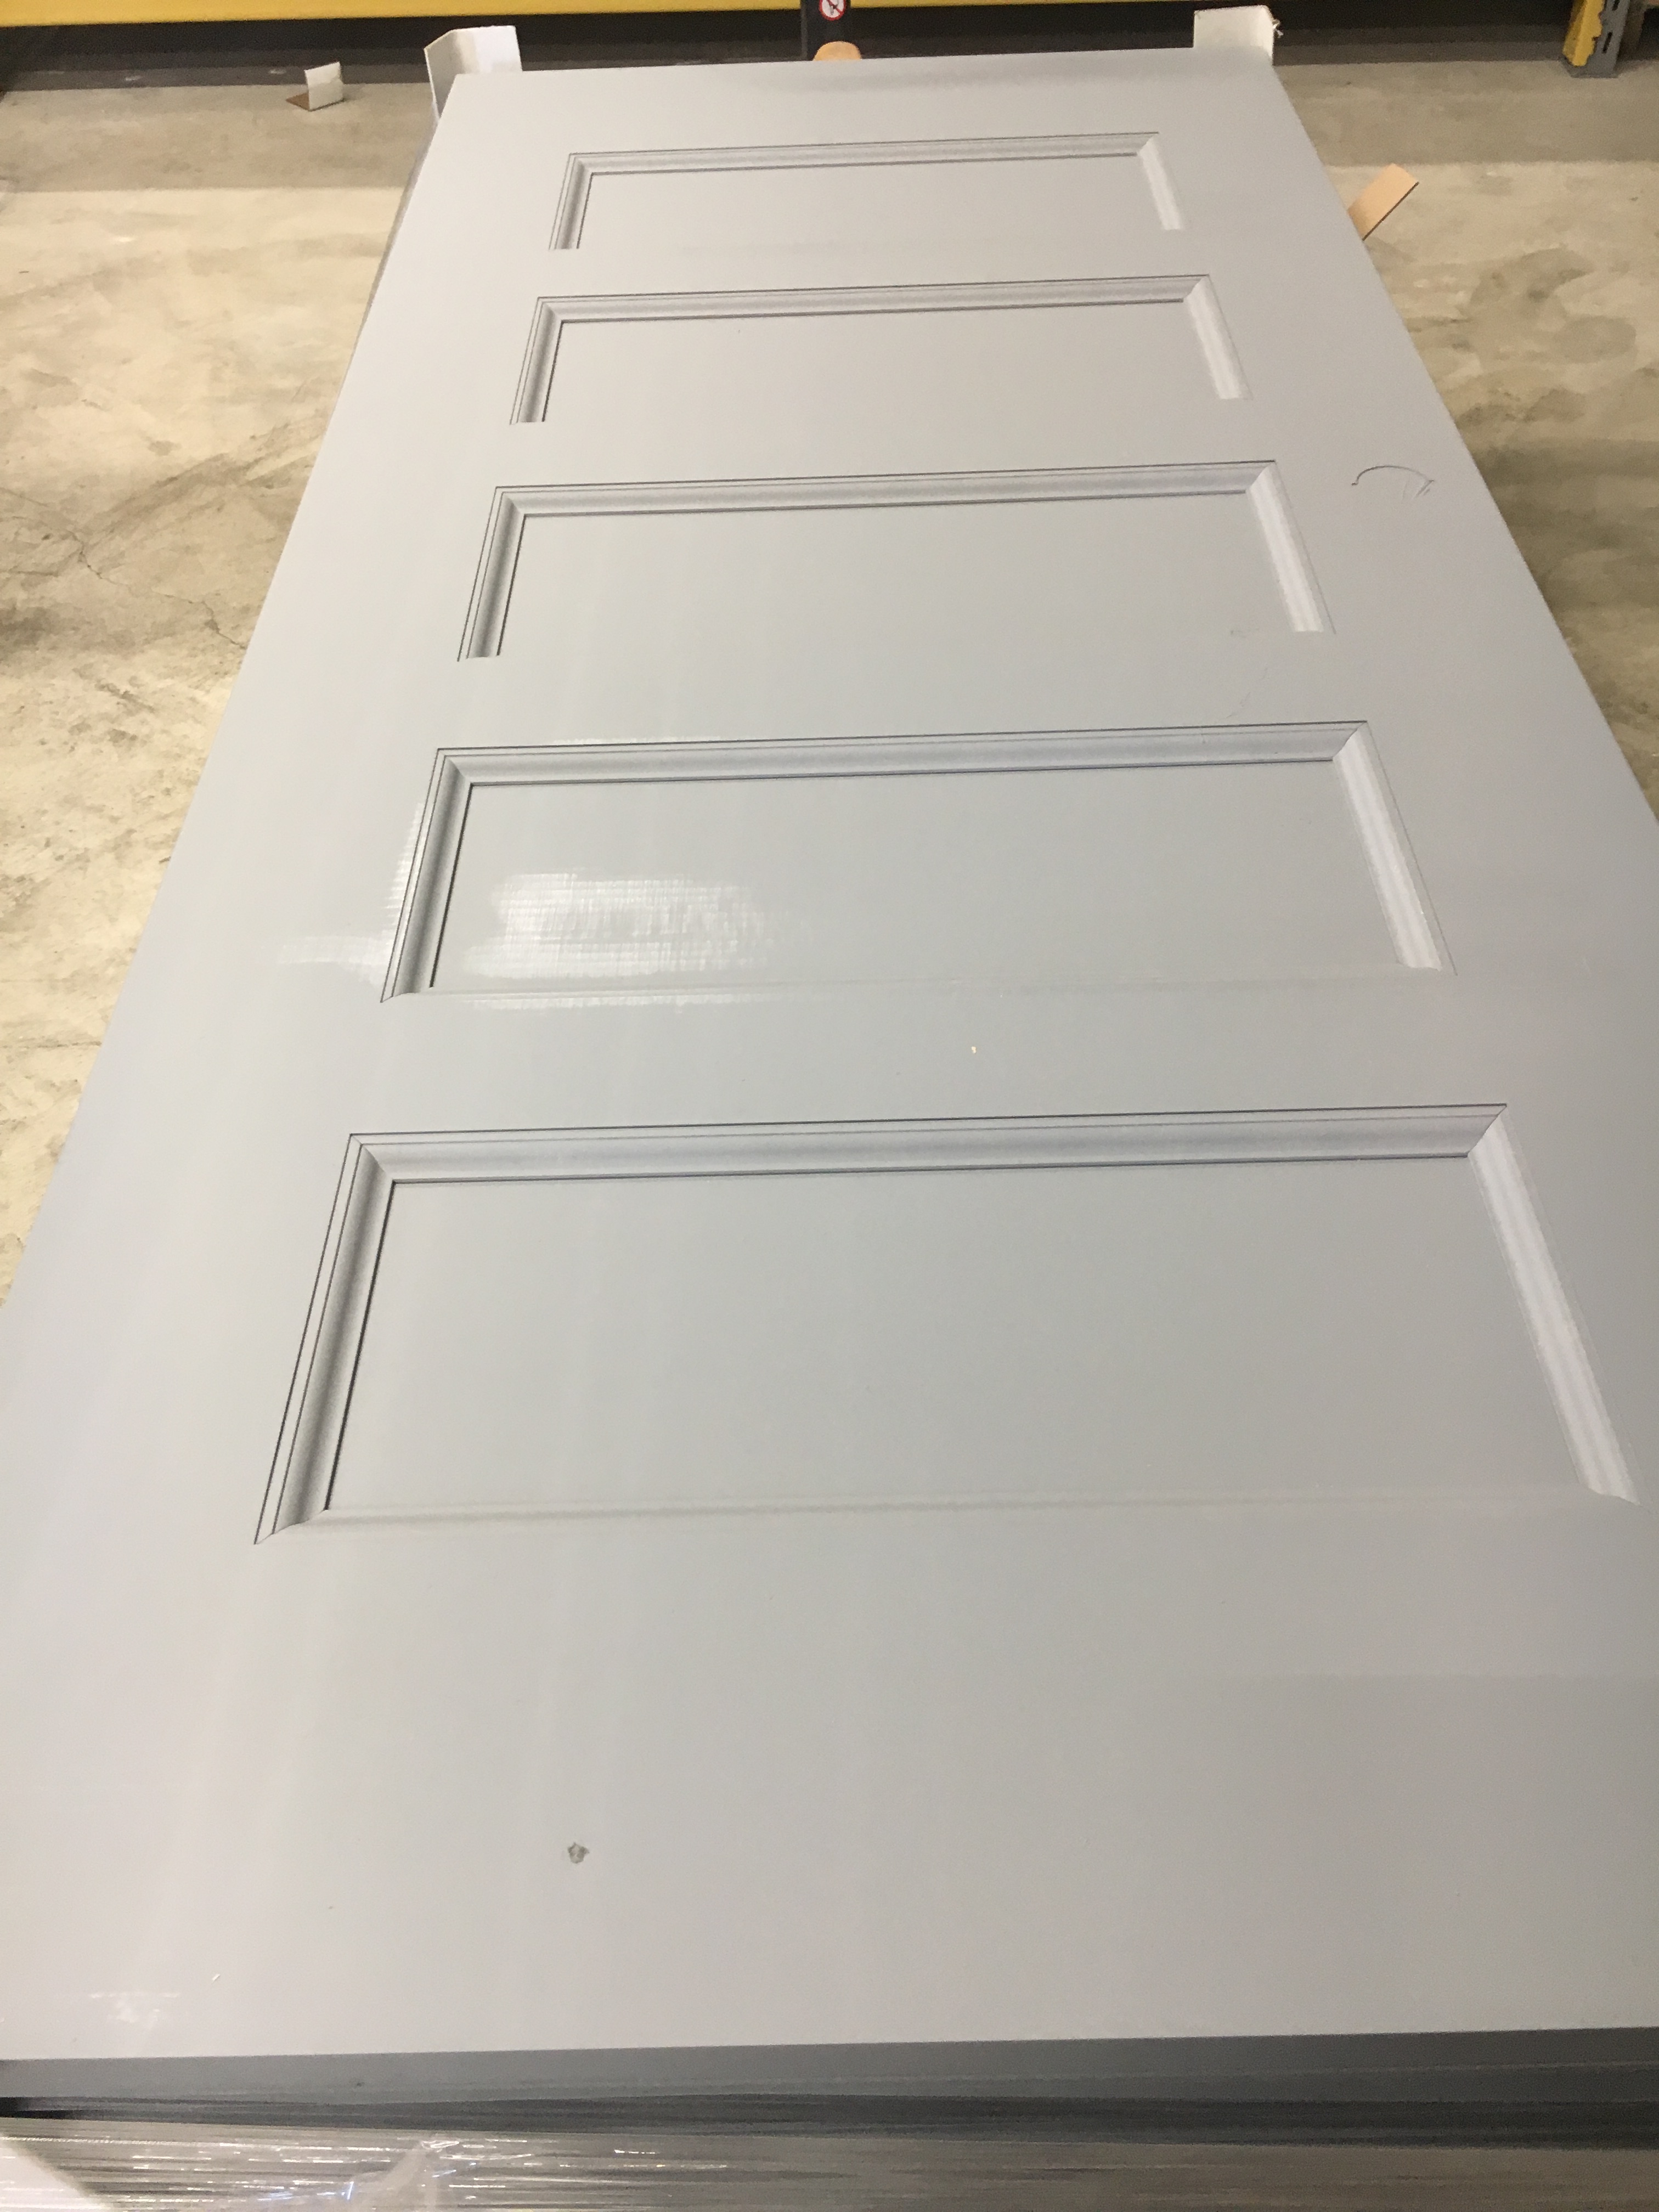 De Lafontaine Fire Rated Steel Doors, Recessed Panel with Steel Moldings to emulated wood doors